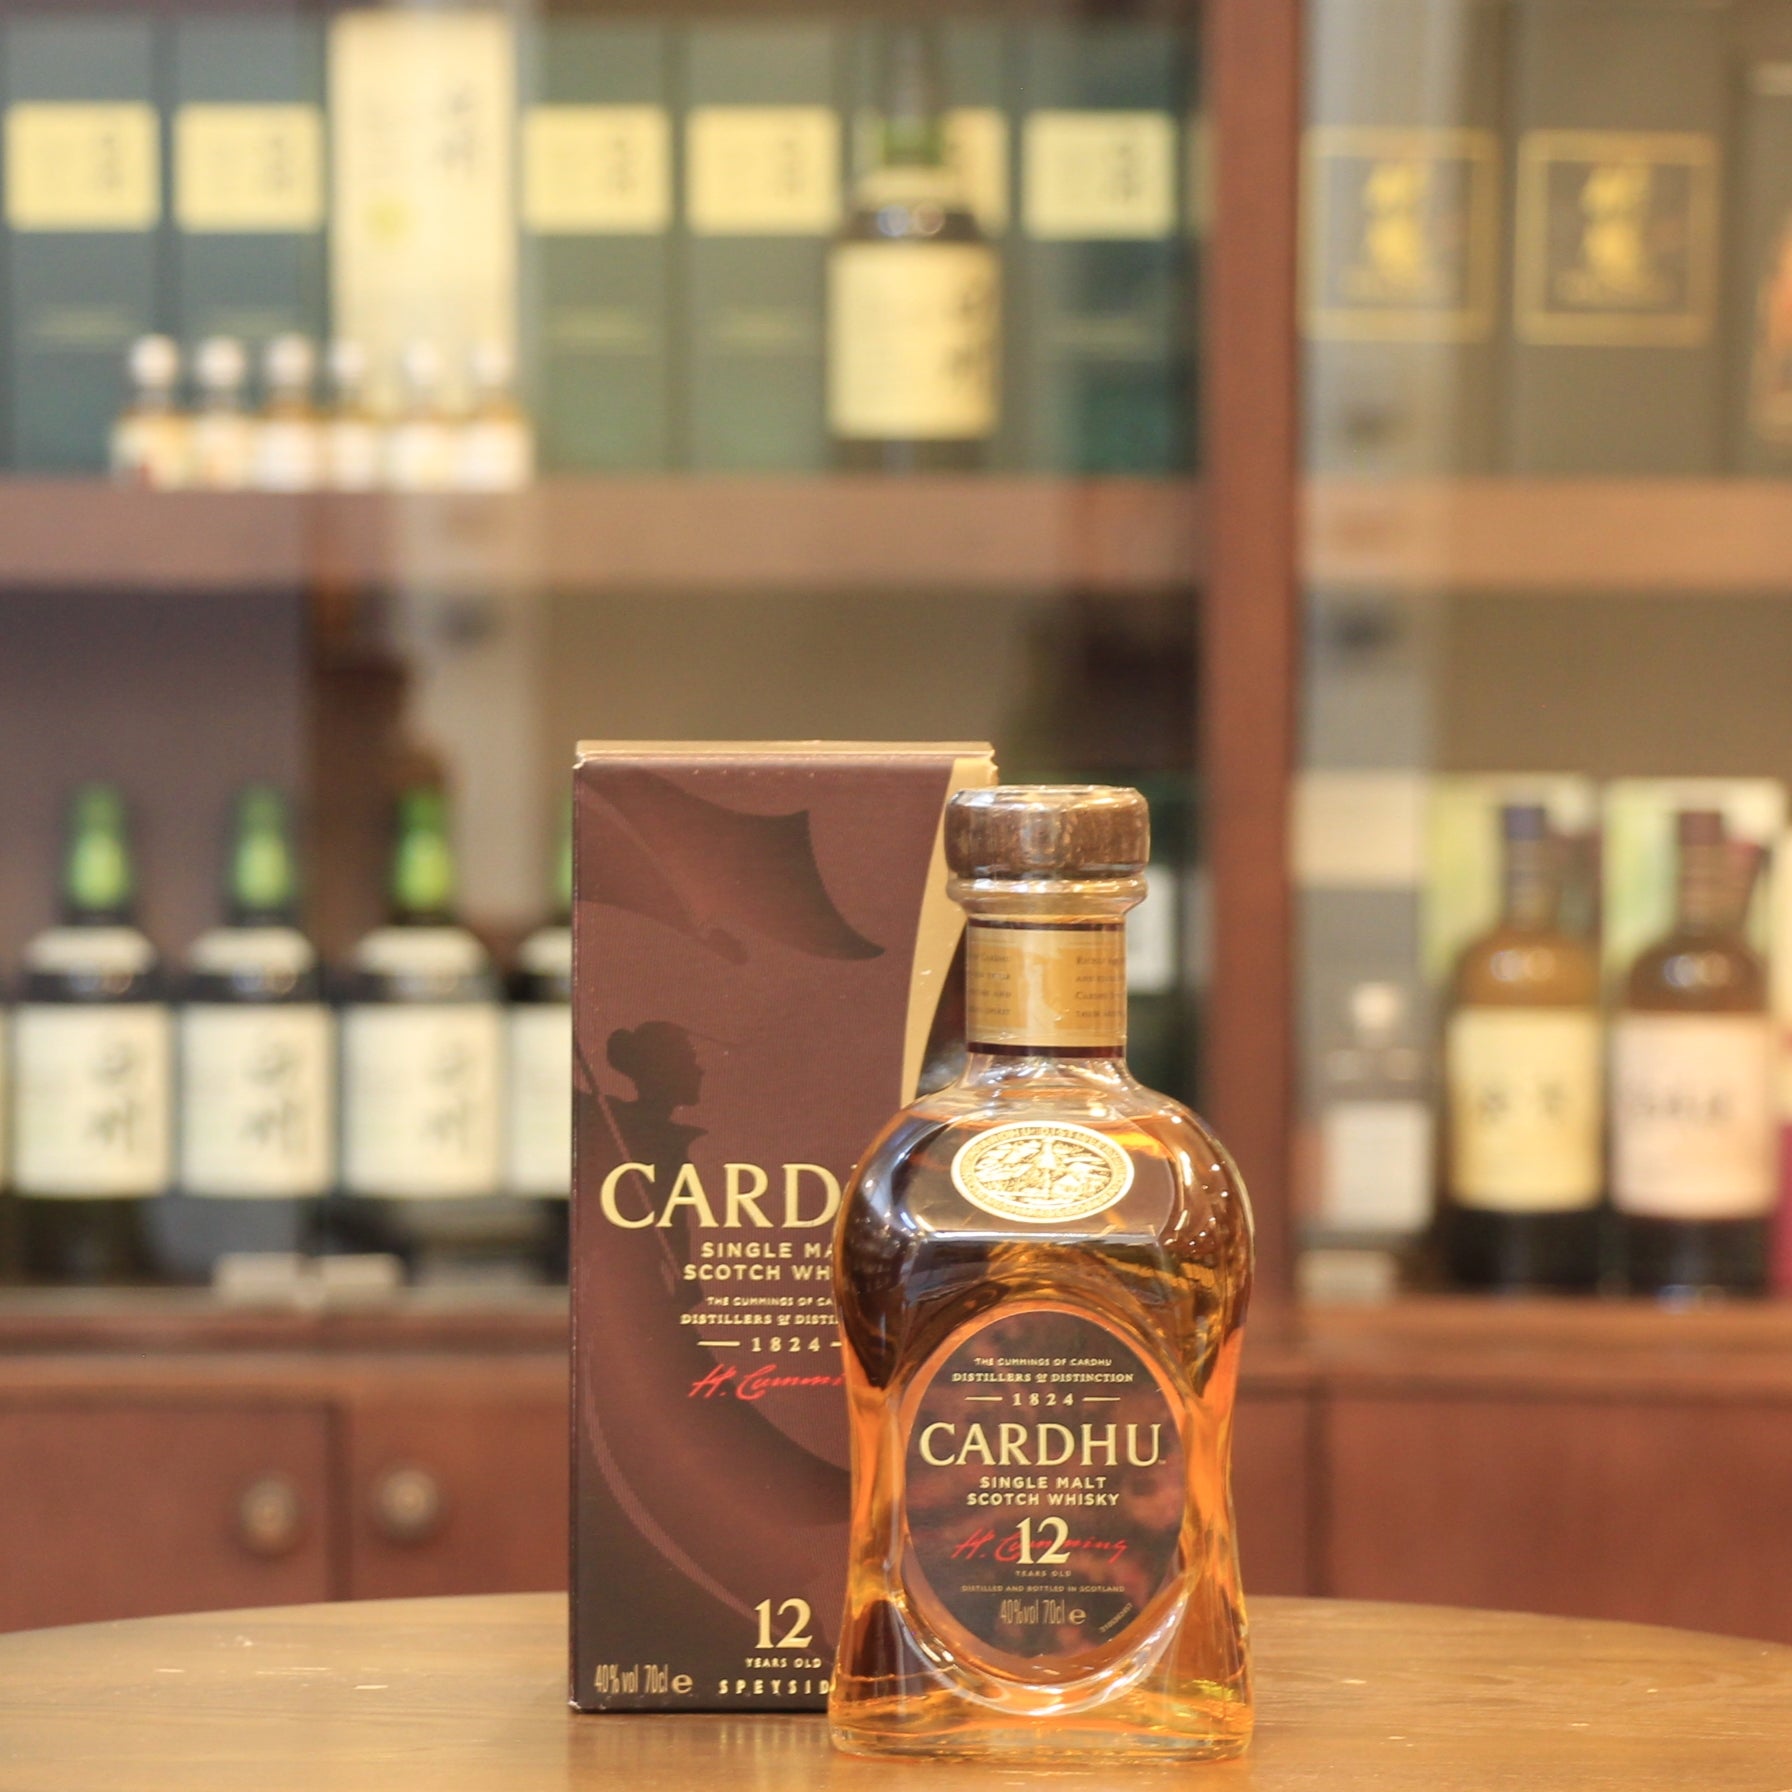 With honeyed layer of rich and fruity flavours, this 12 Years Old matured Speyside whisky from the Cardhu distillery is a soft and smooth Single Malt.